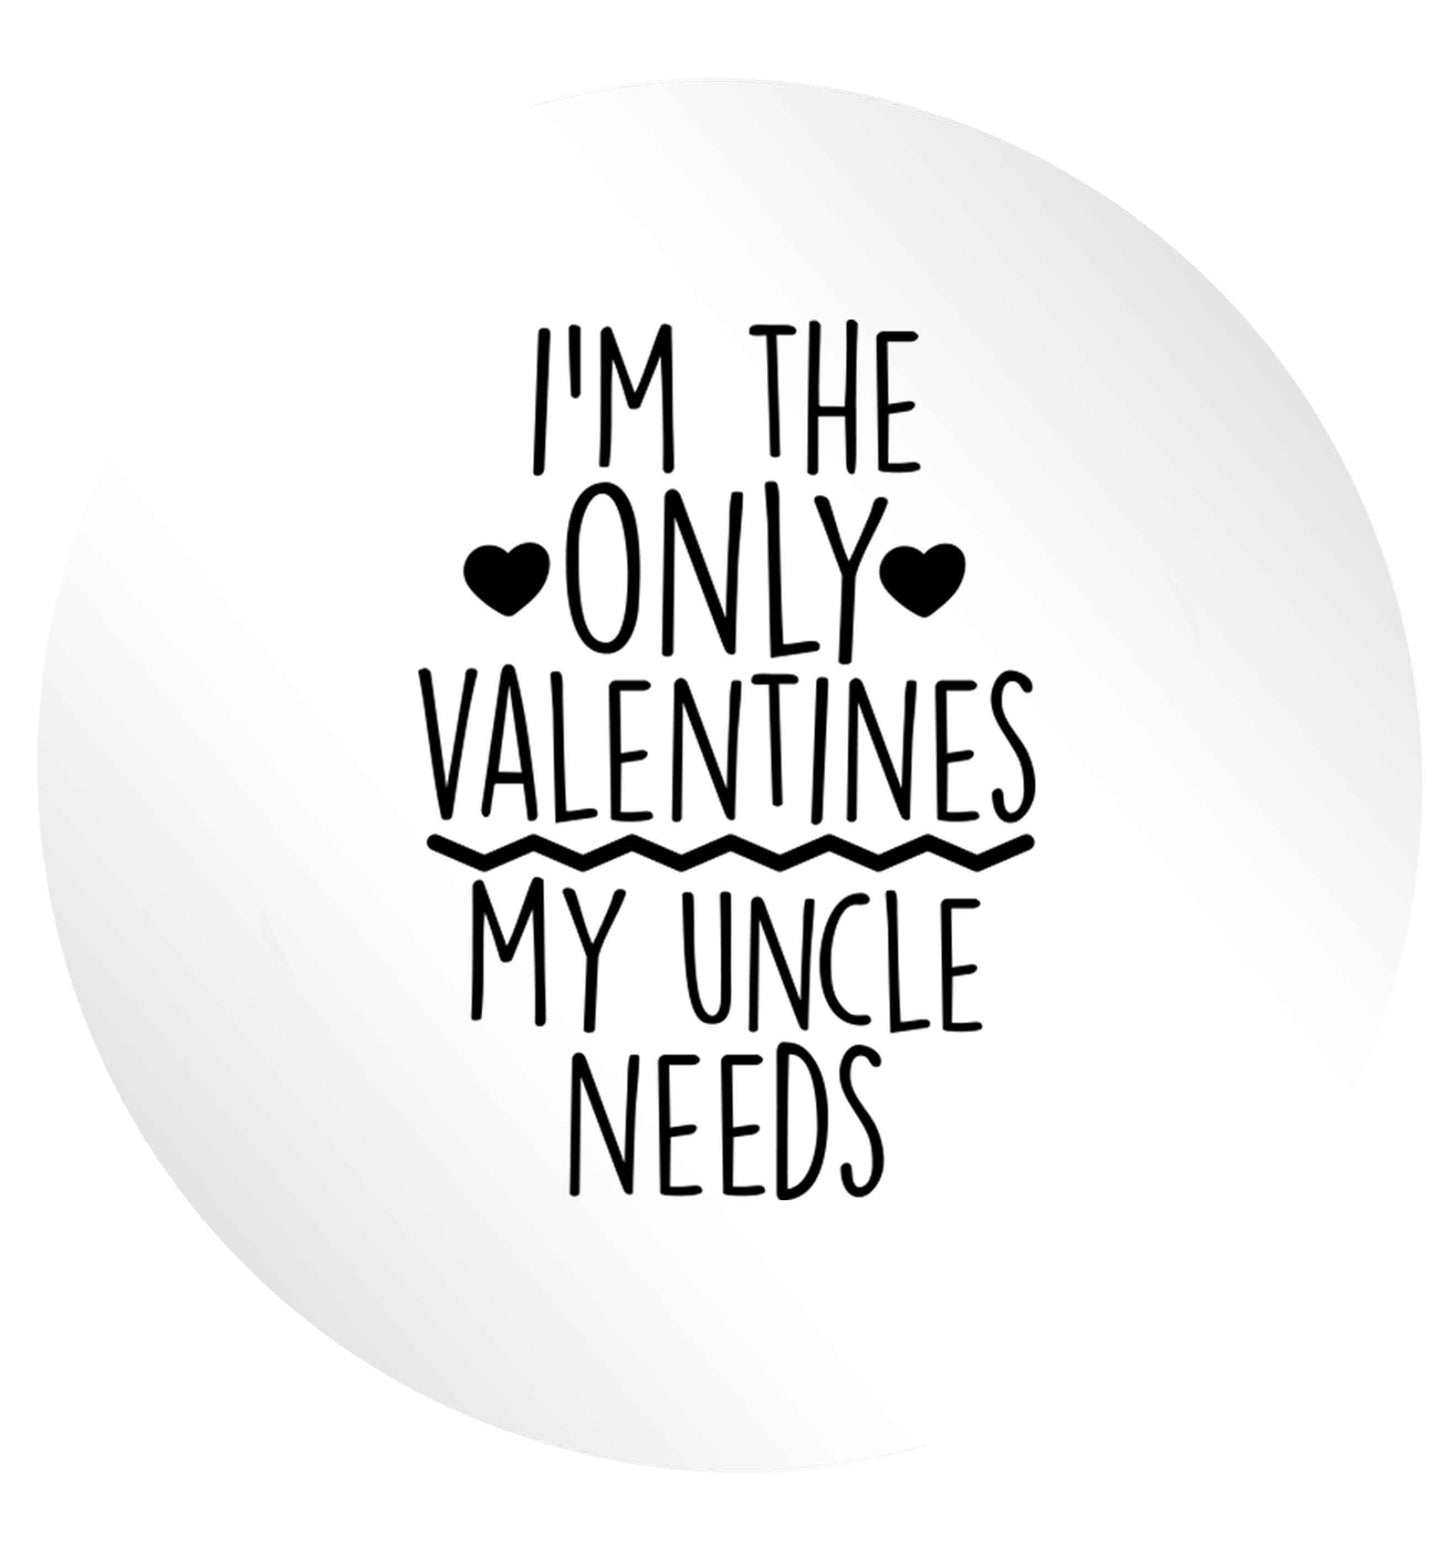 I'm the only valentines my uncle needs 24 @ 45mm matt circle stickers